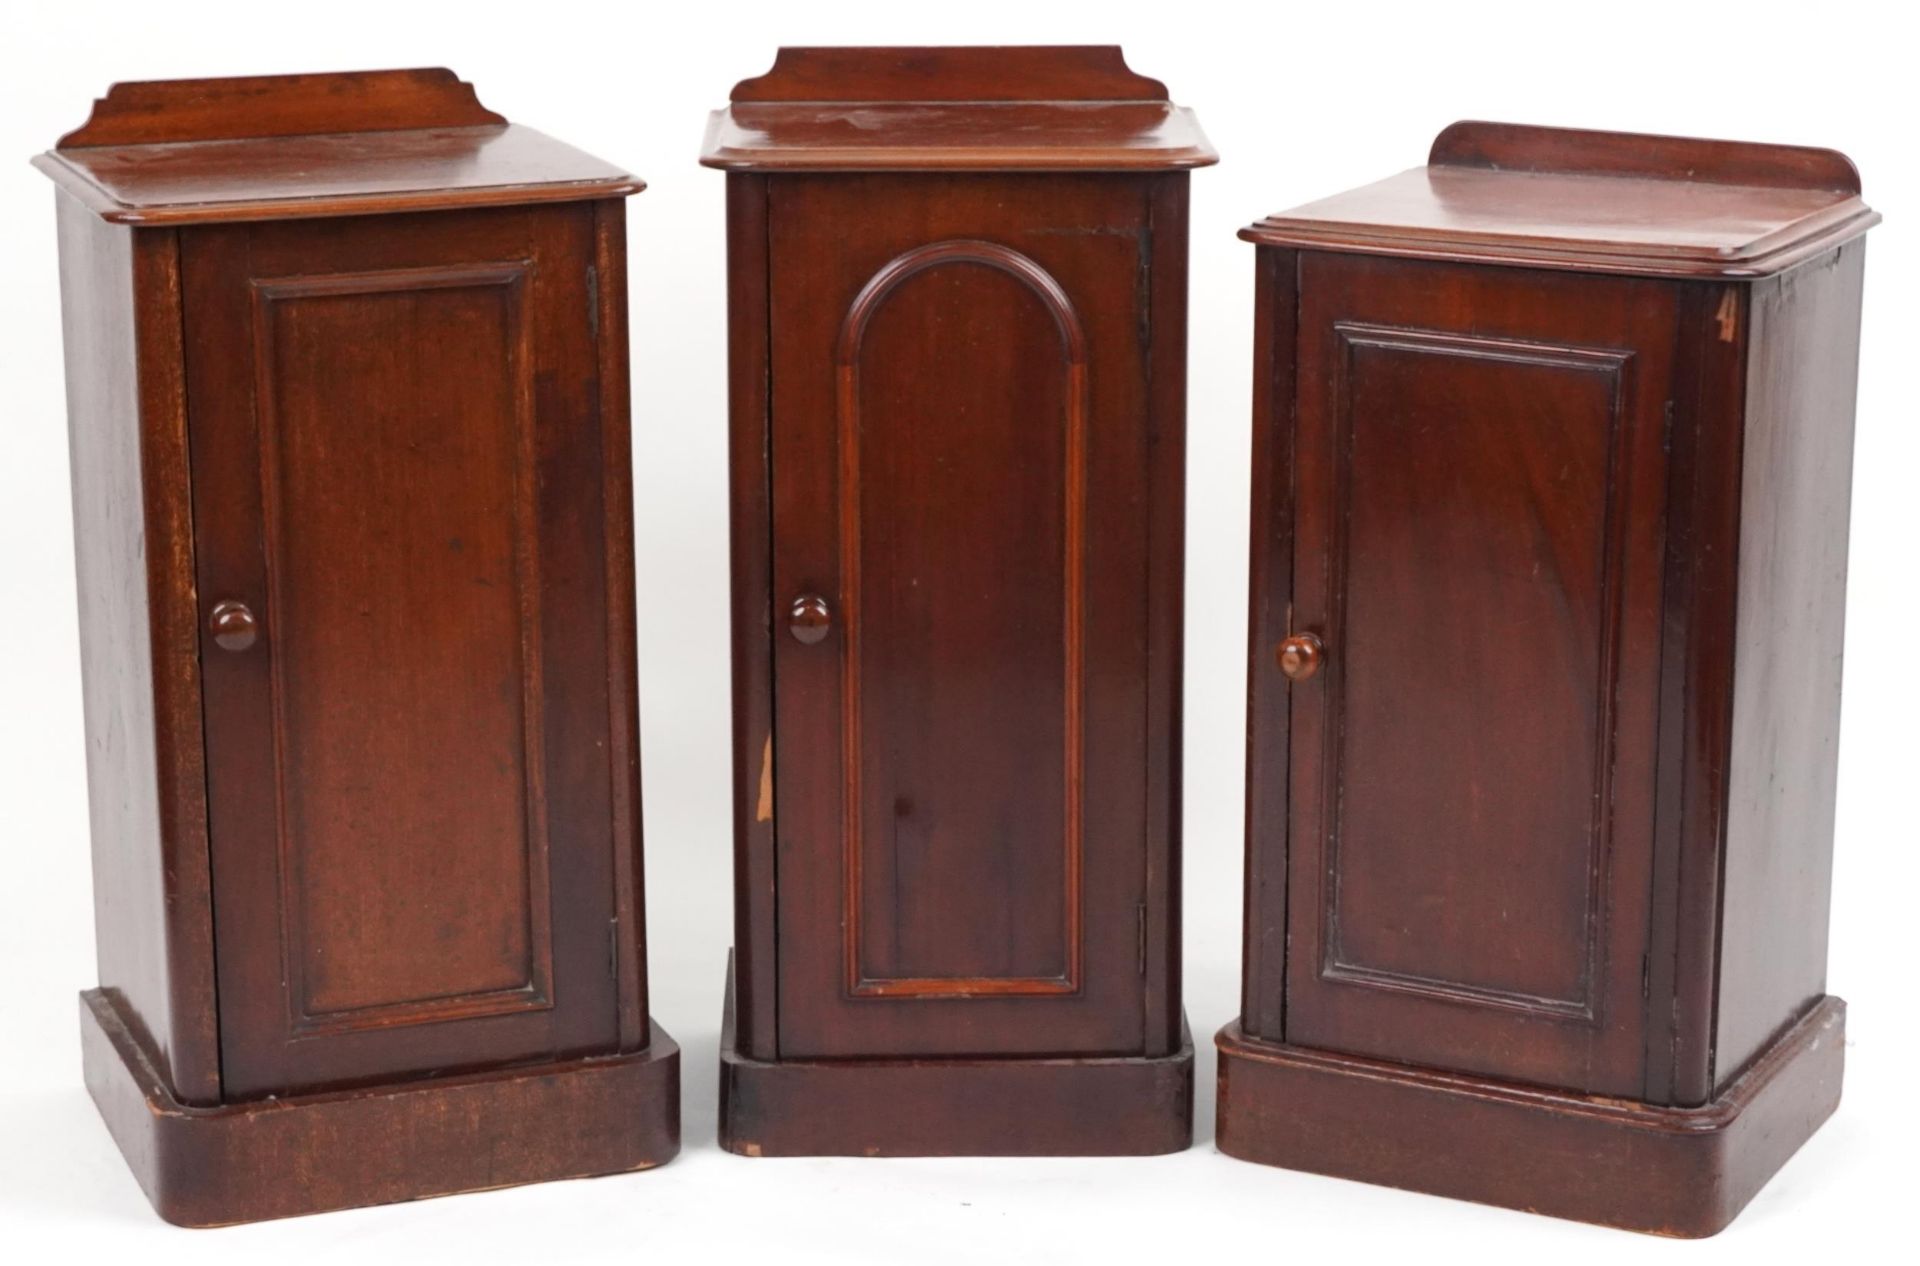 Three Victorian mahogany pot cupboards, the largest 76cm high : For further information on this